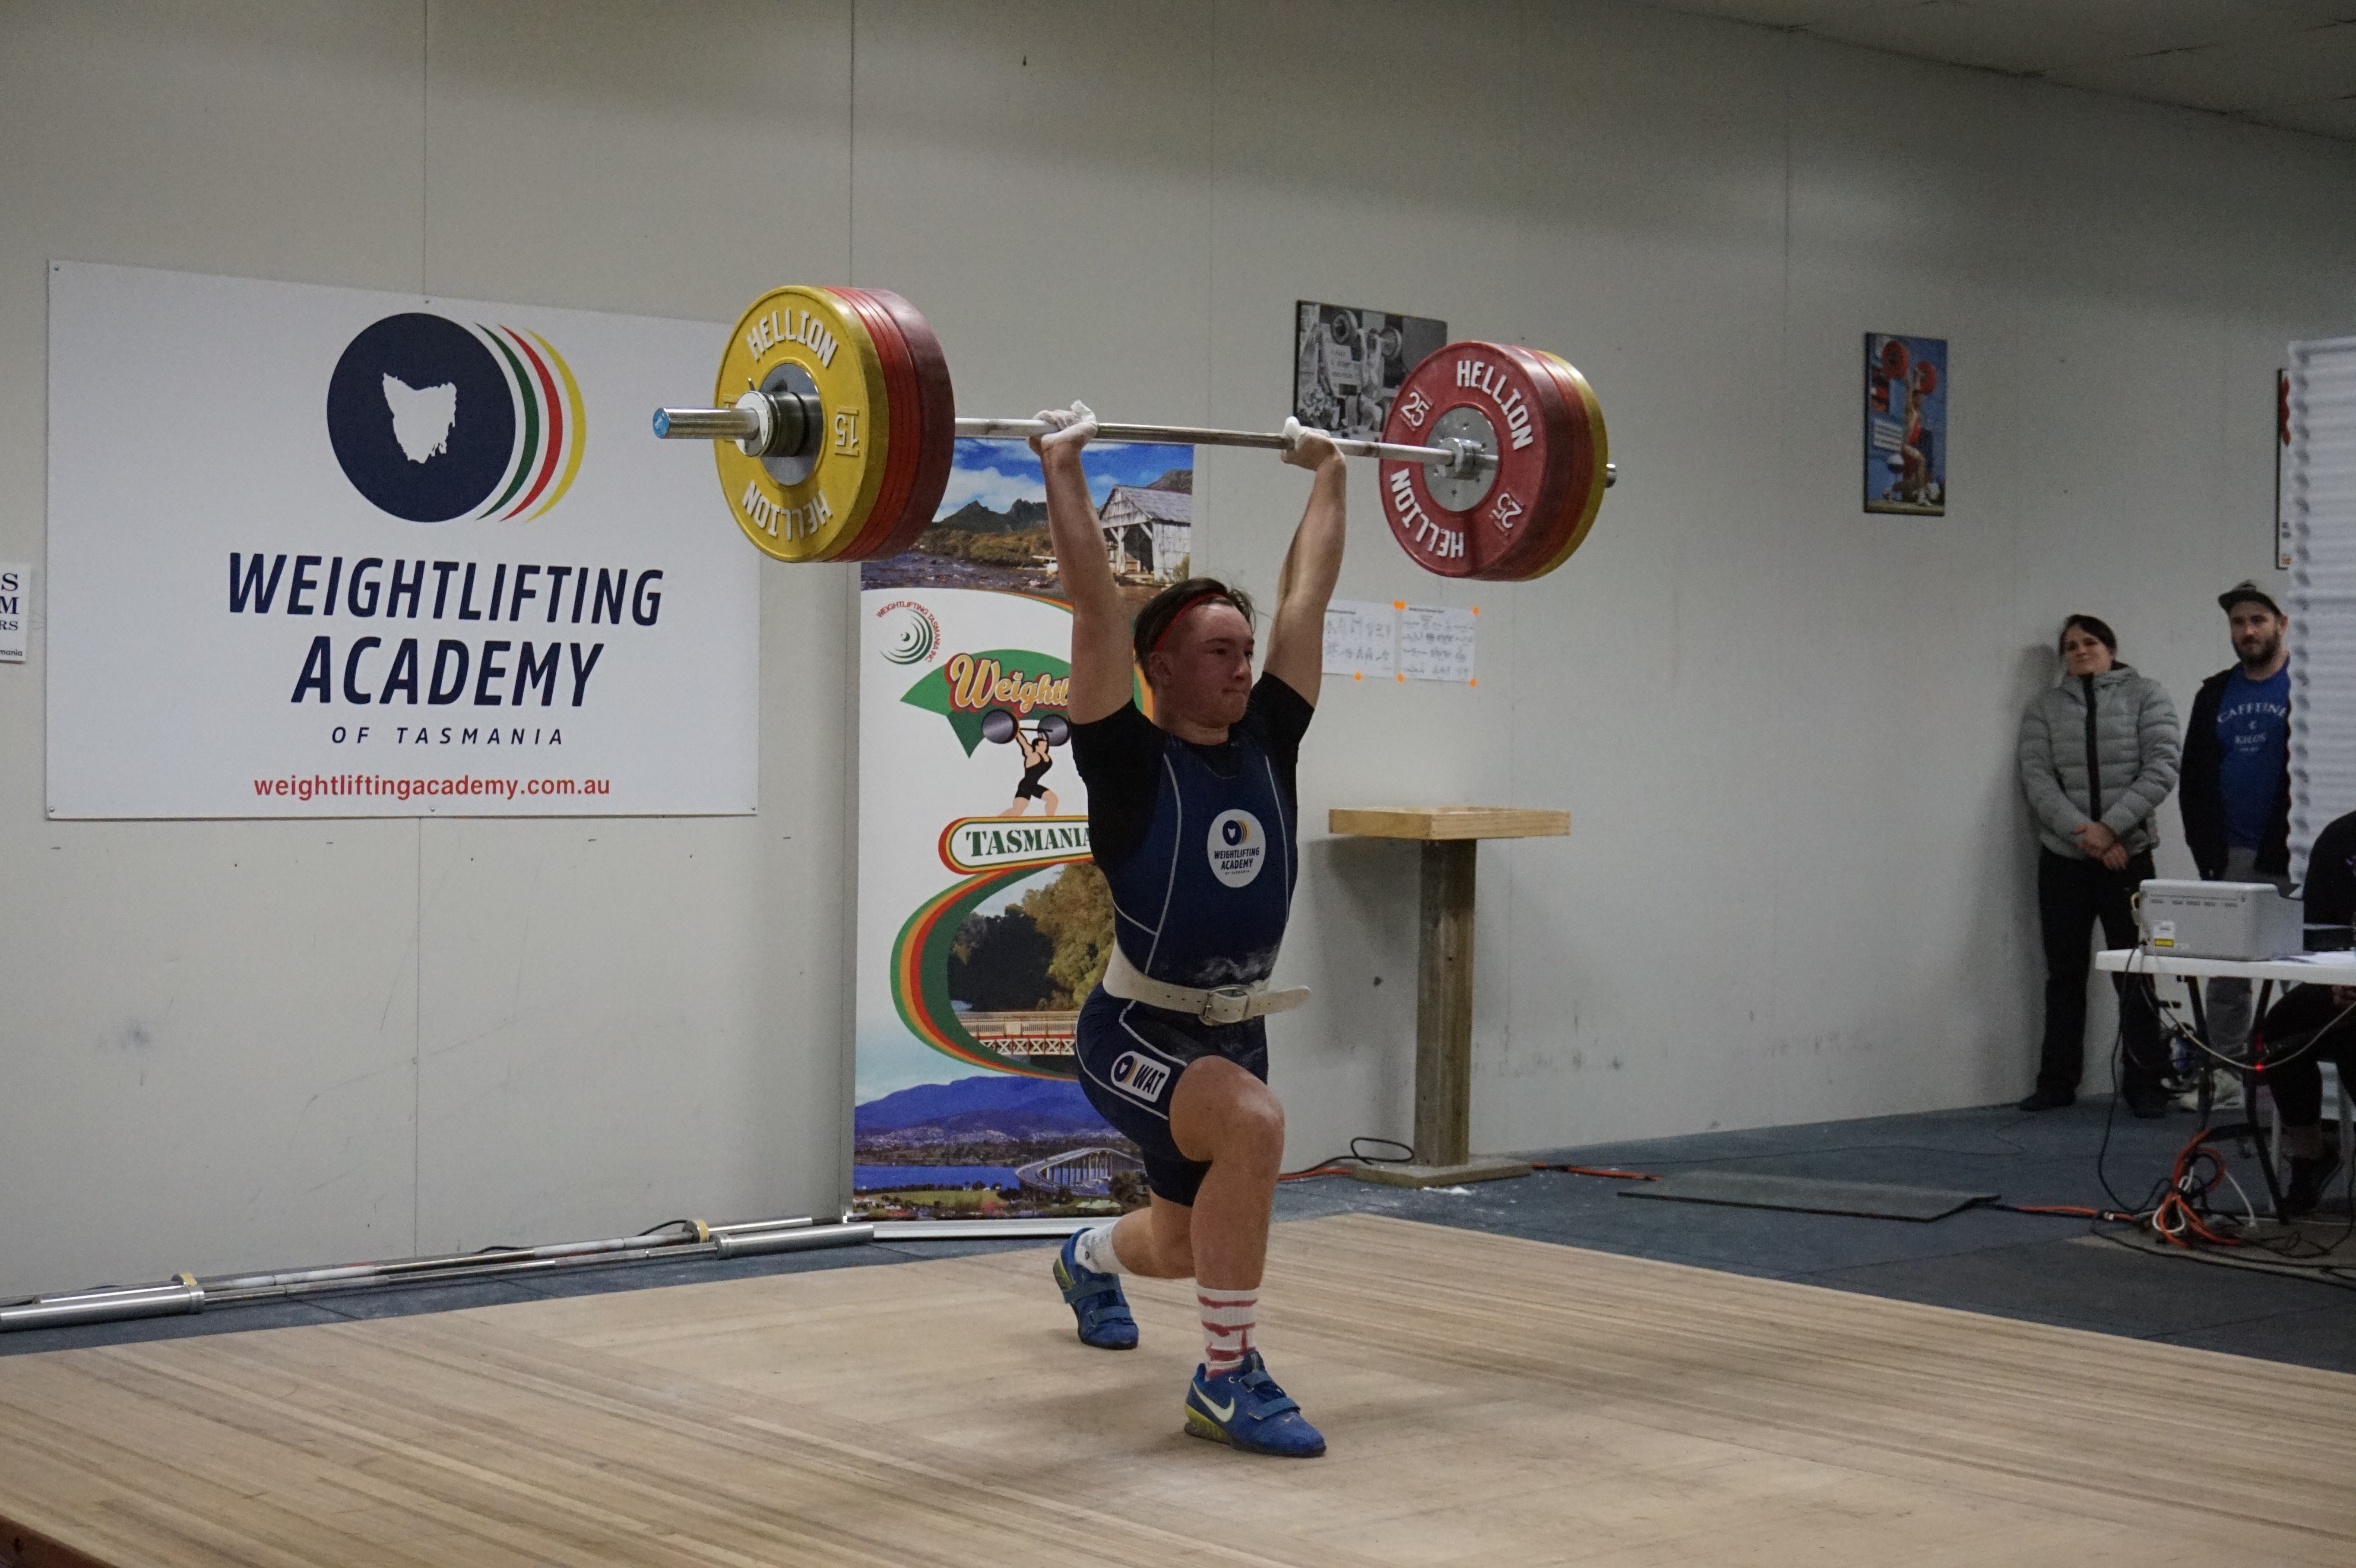 Best lift of the day by Zac Millhouse - 156Kg in the Clean & Jerk